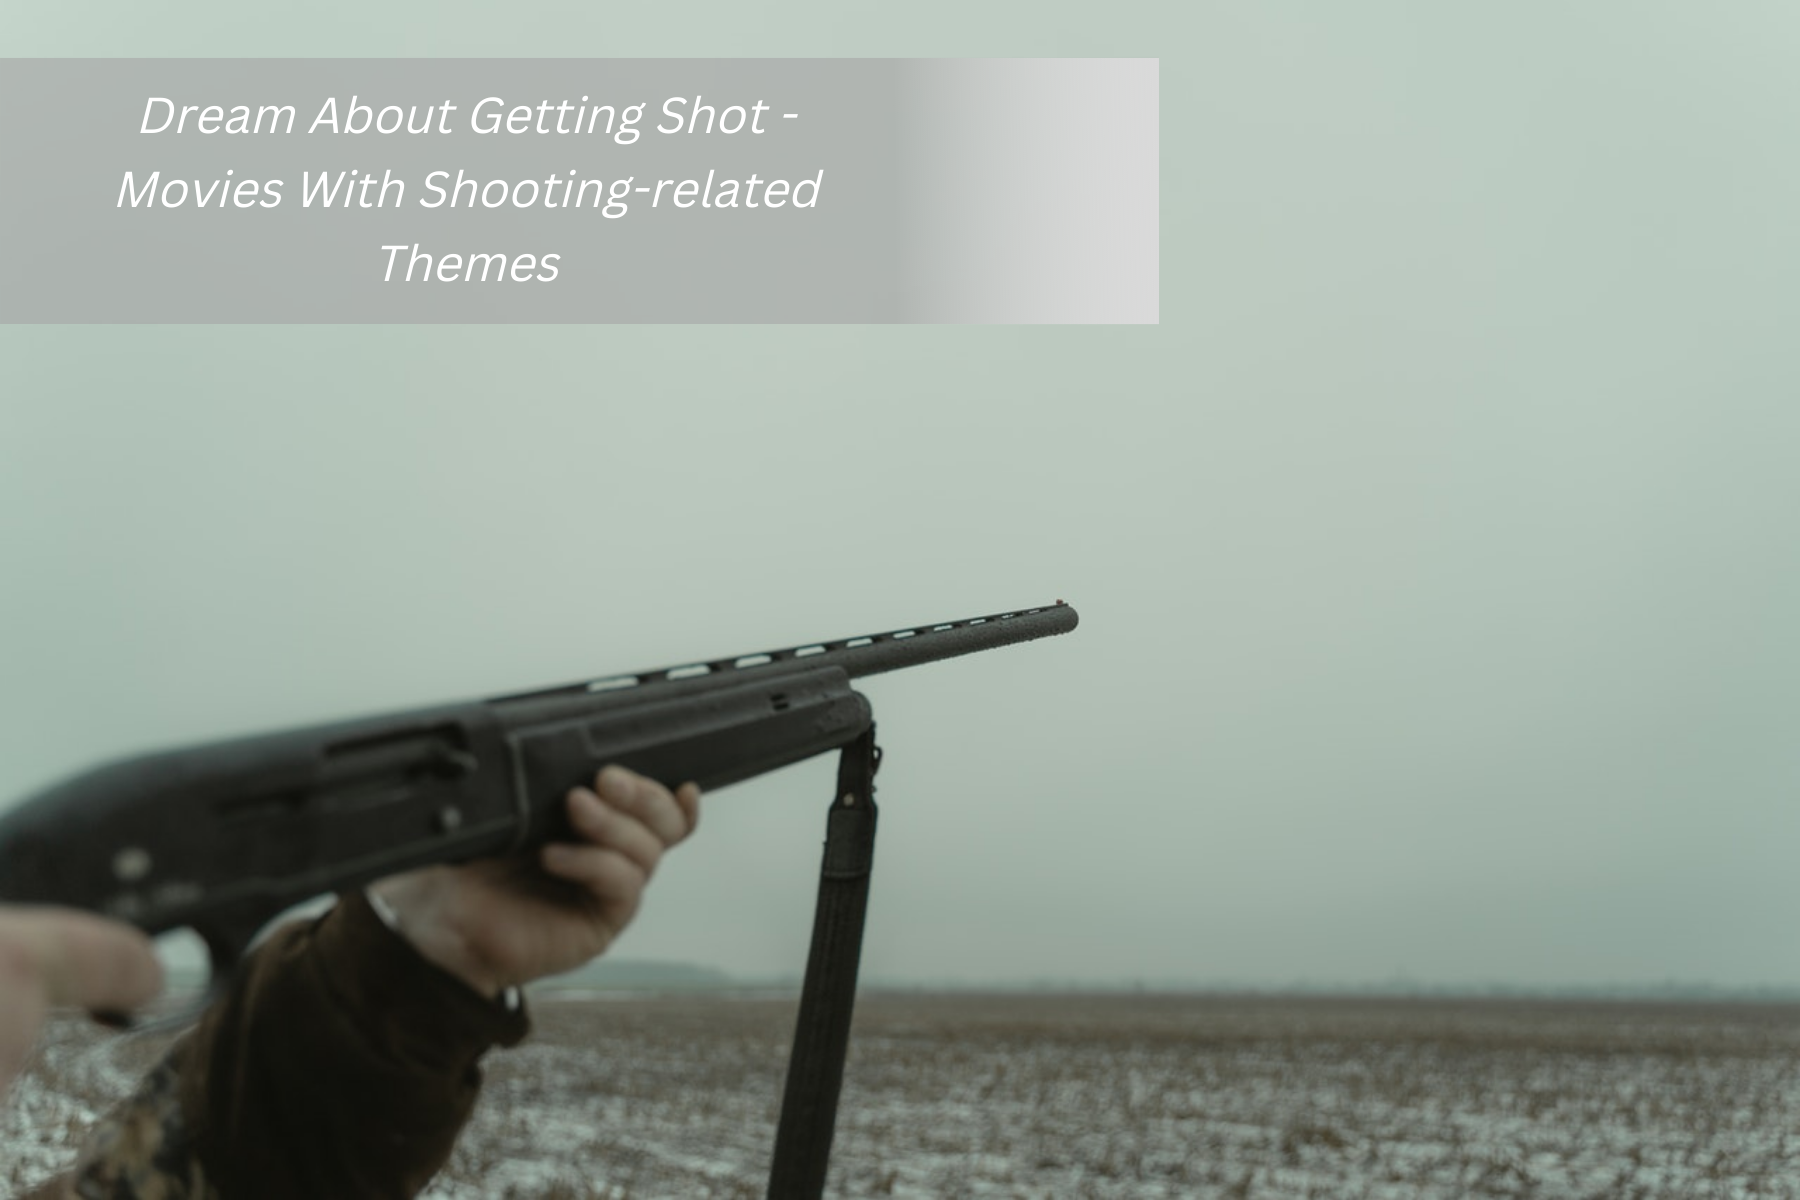 Dream About Getting Shot - Movies With Shooting-related Themes